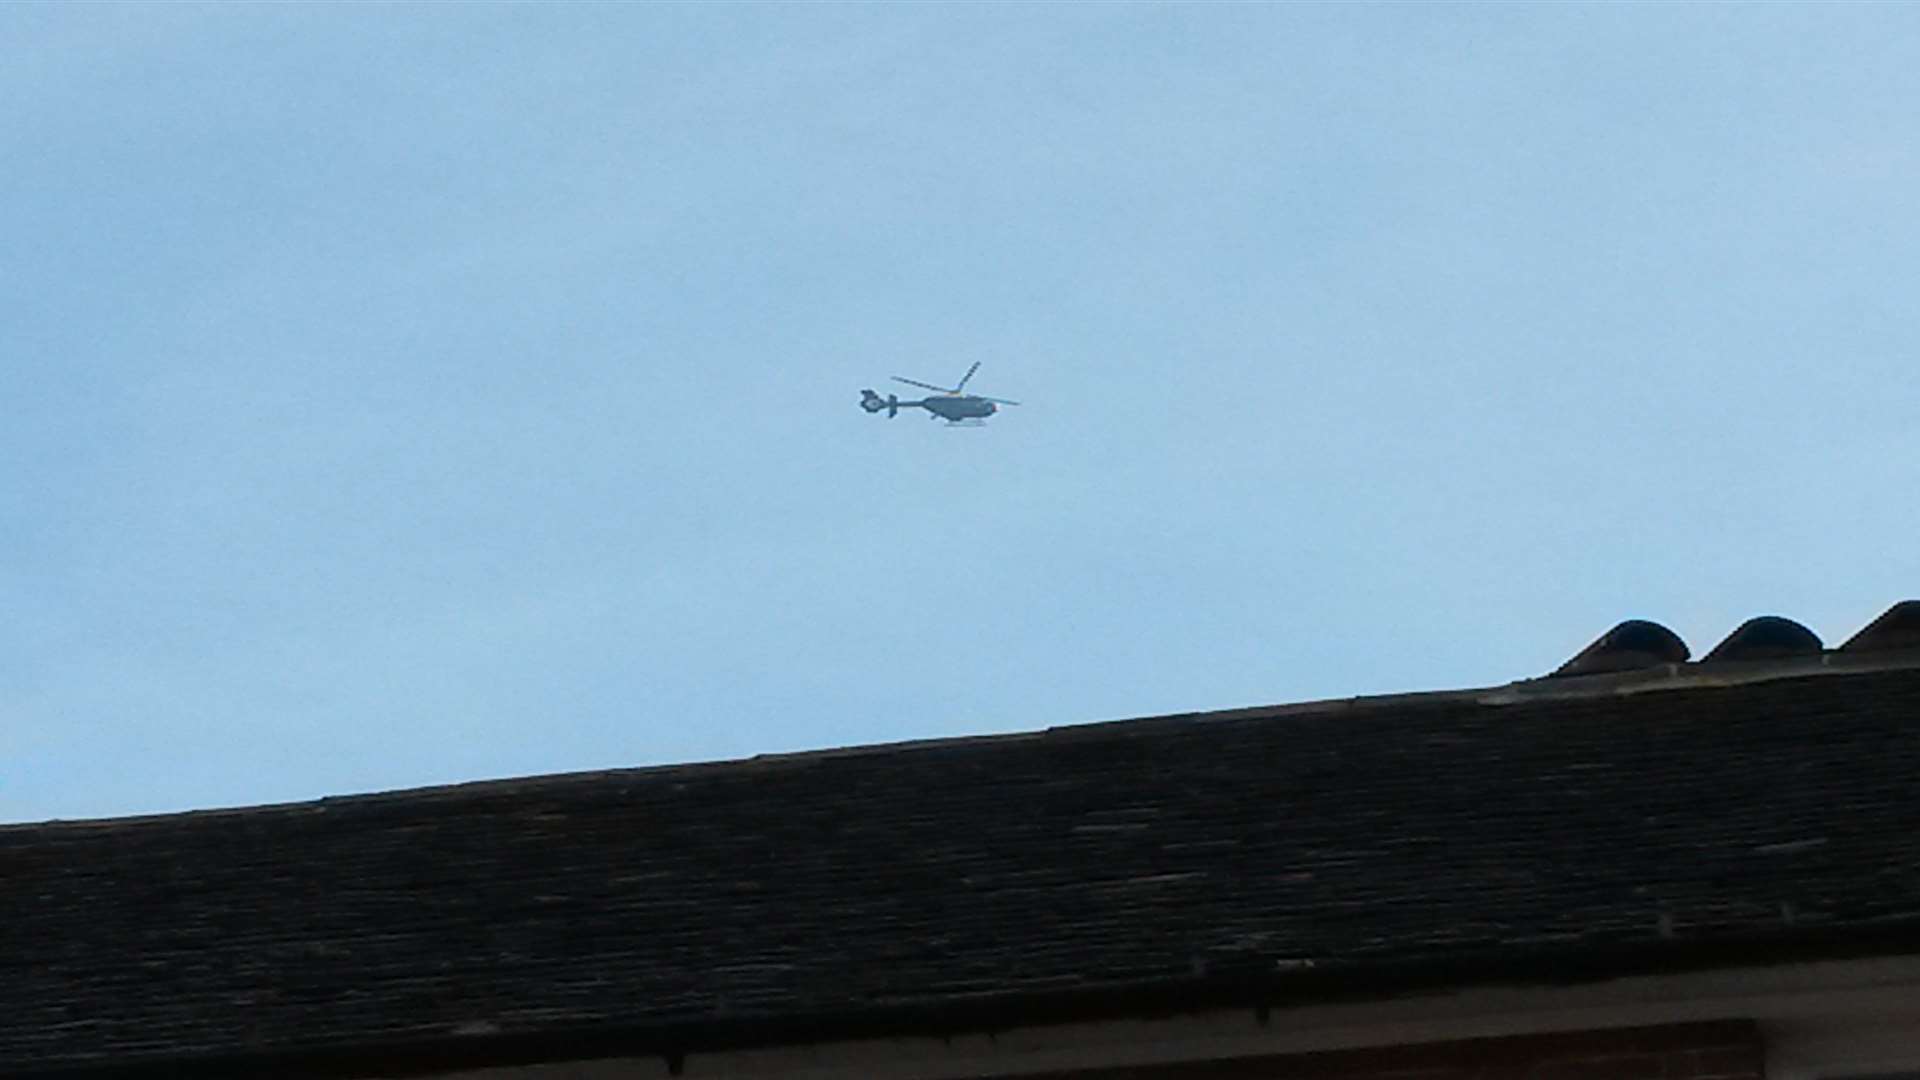 The helicopter seen above the town centre